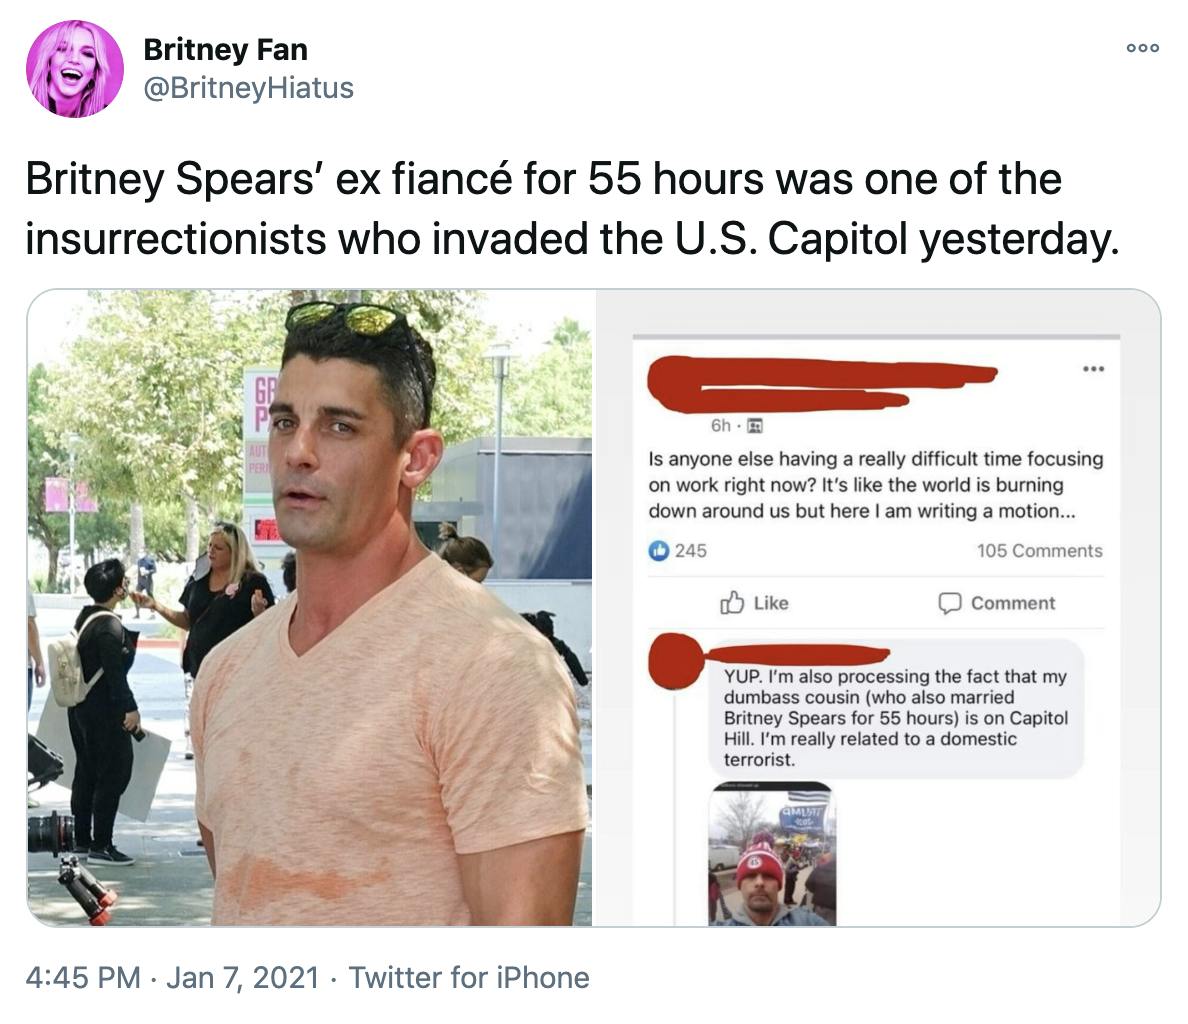 'Britney Spears’ ex fiancé for 55 hours was one of the insurrectionists who invaded the U.S. Capitol yesterday.' On left, a photograph of Jason Alexander, a dark haired white man with sunglasses on top of his short hair and a v necked peach t-shirt, on the right a screenshot of a Facebook post with the names blocked out in red, the post reads 'Is anyone else having trouble focusing on work right now? It's like the world is burning down around us but here I am writing a motion...' The comment reads 'YUP. I'm also processing the fact that my dumbass cousin (who also marries Britney Spears for 55 hours) is on Capitol Hill. I'm really related to a domestic terrorist.' The comment features another selfie of Alexander, wearing a red and white bobble hat, seemingly taken on Capitol Hill